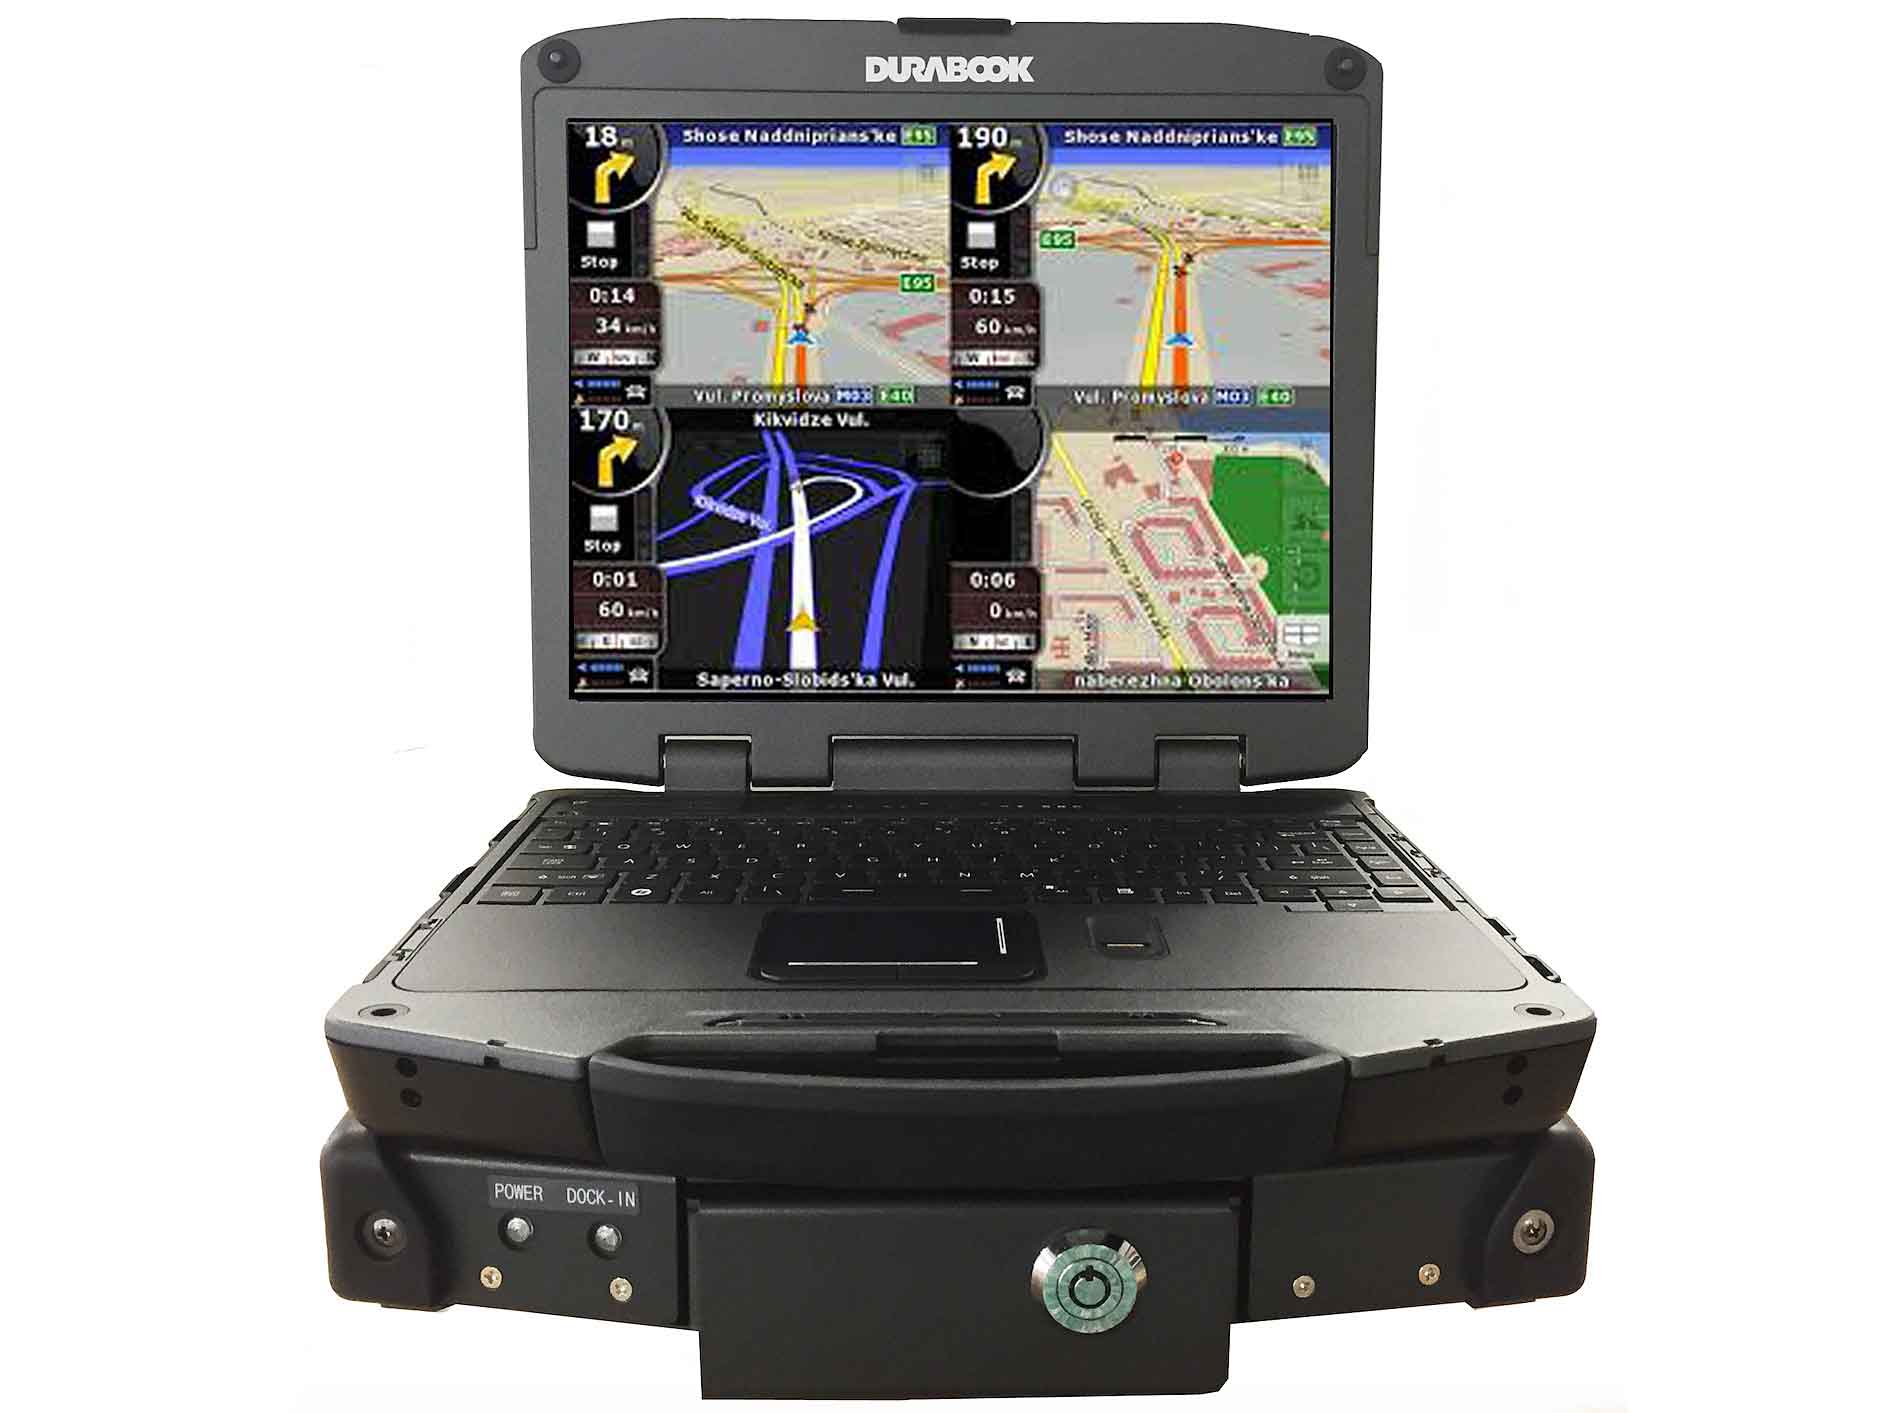 The-All-New DURABOOK R8300 R3 is specifically designed for the military, public safety and utility markets.